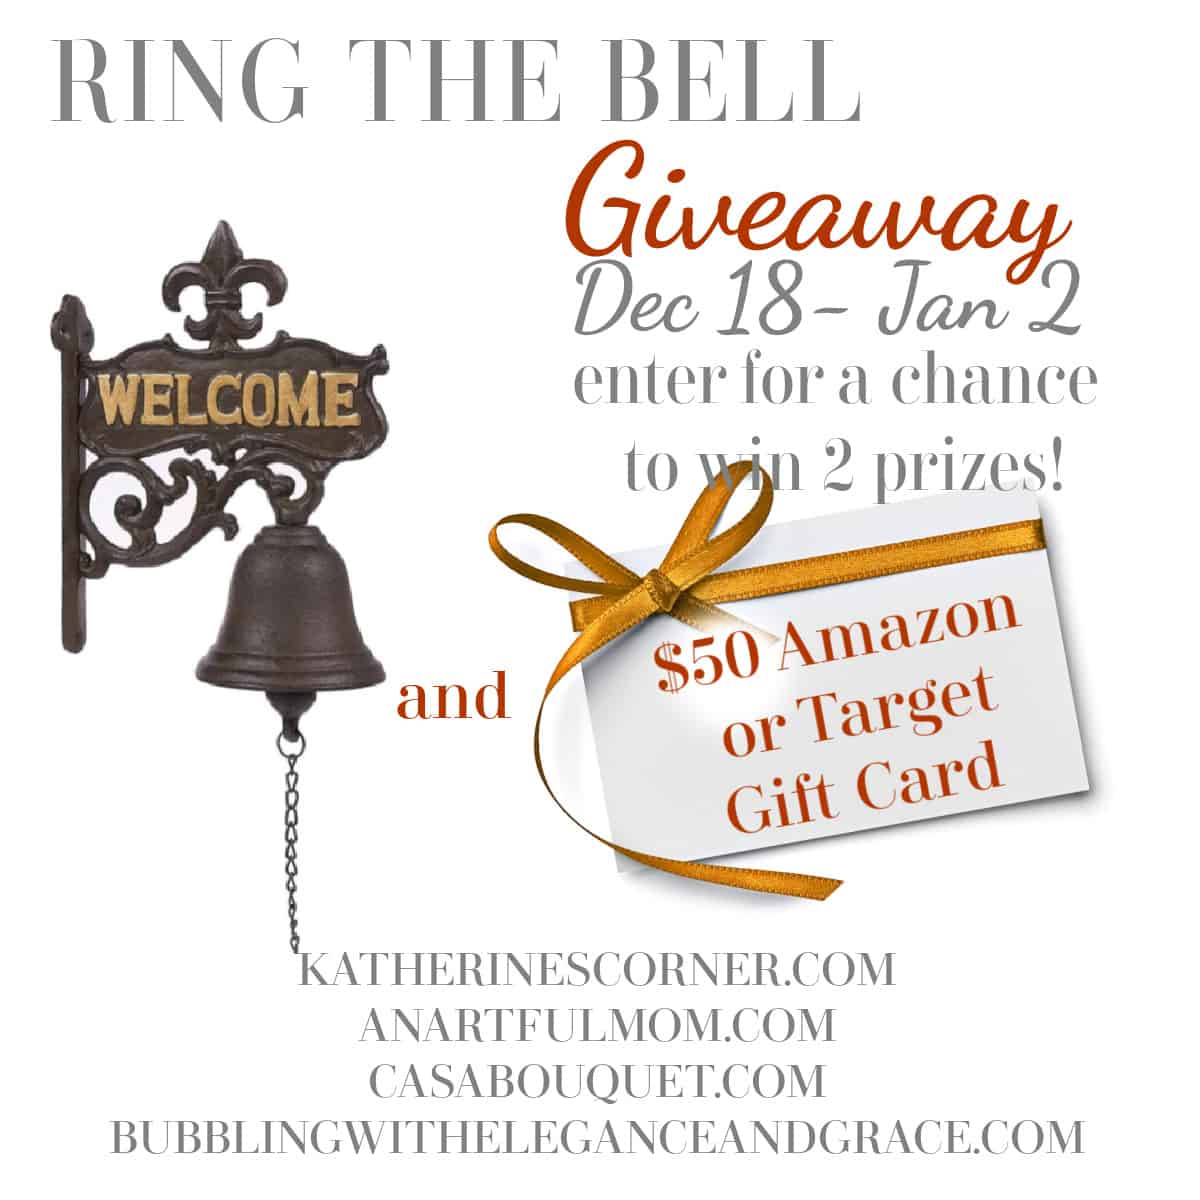 Ring the Bell Giveaway